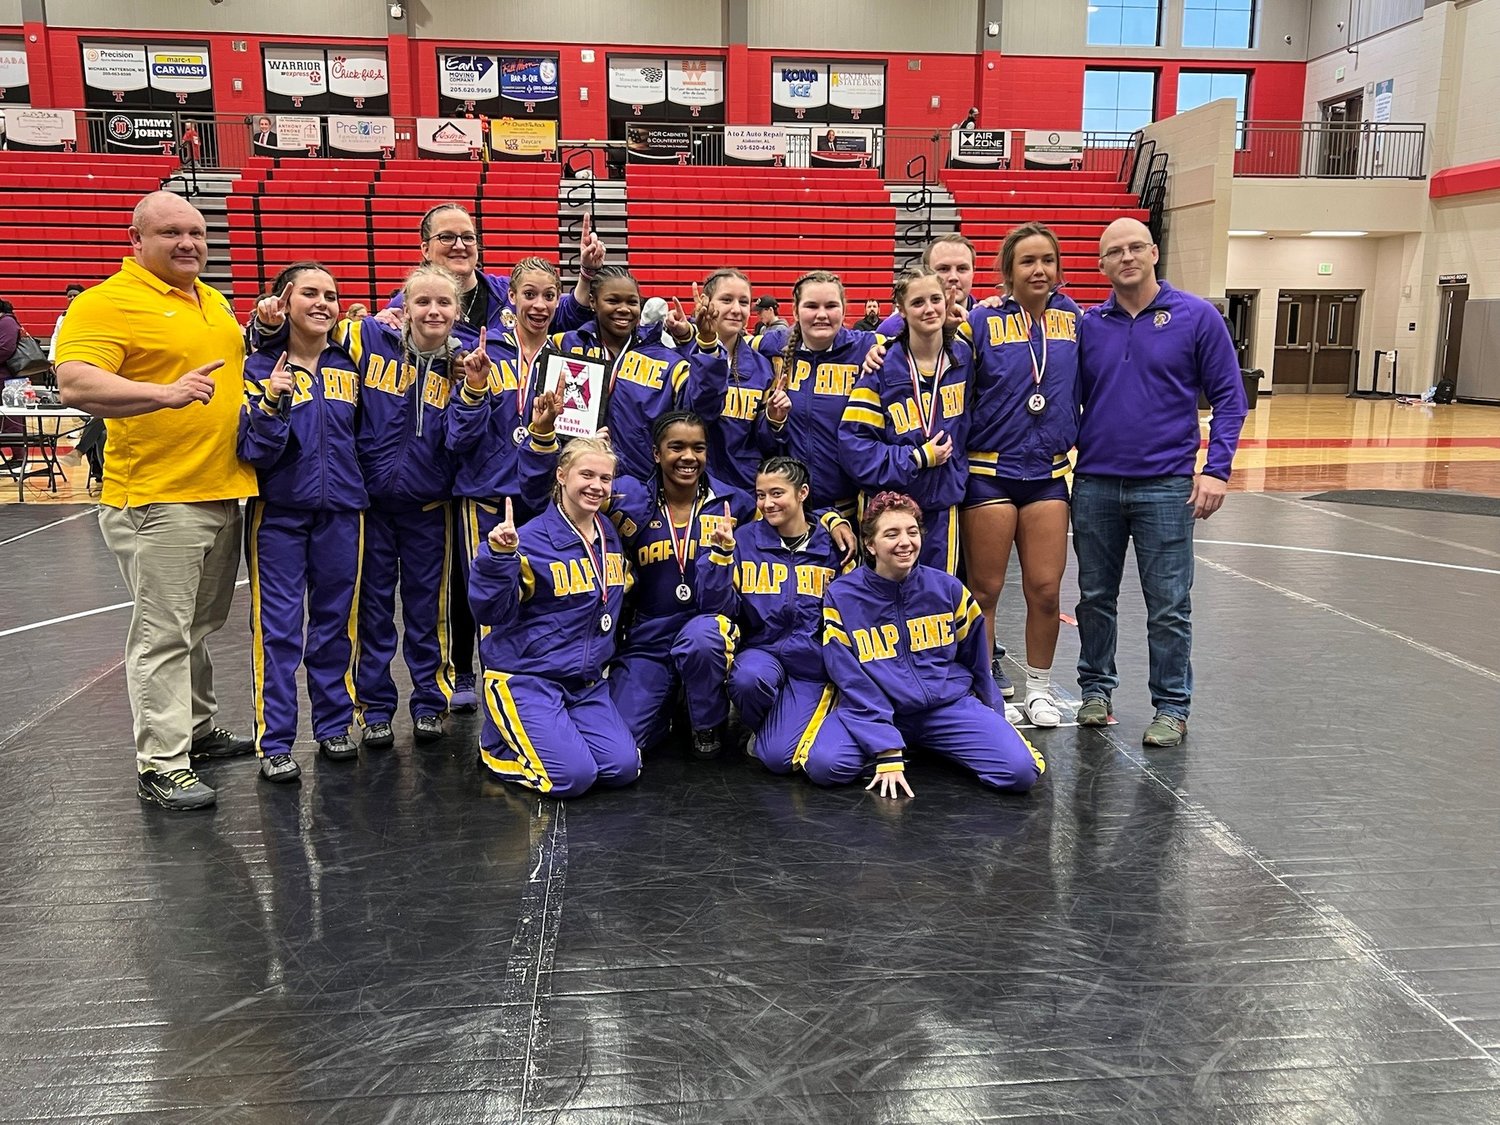 The Daphne Lady Trojans wrestling team has claimed back-to-back state championships.